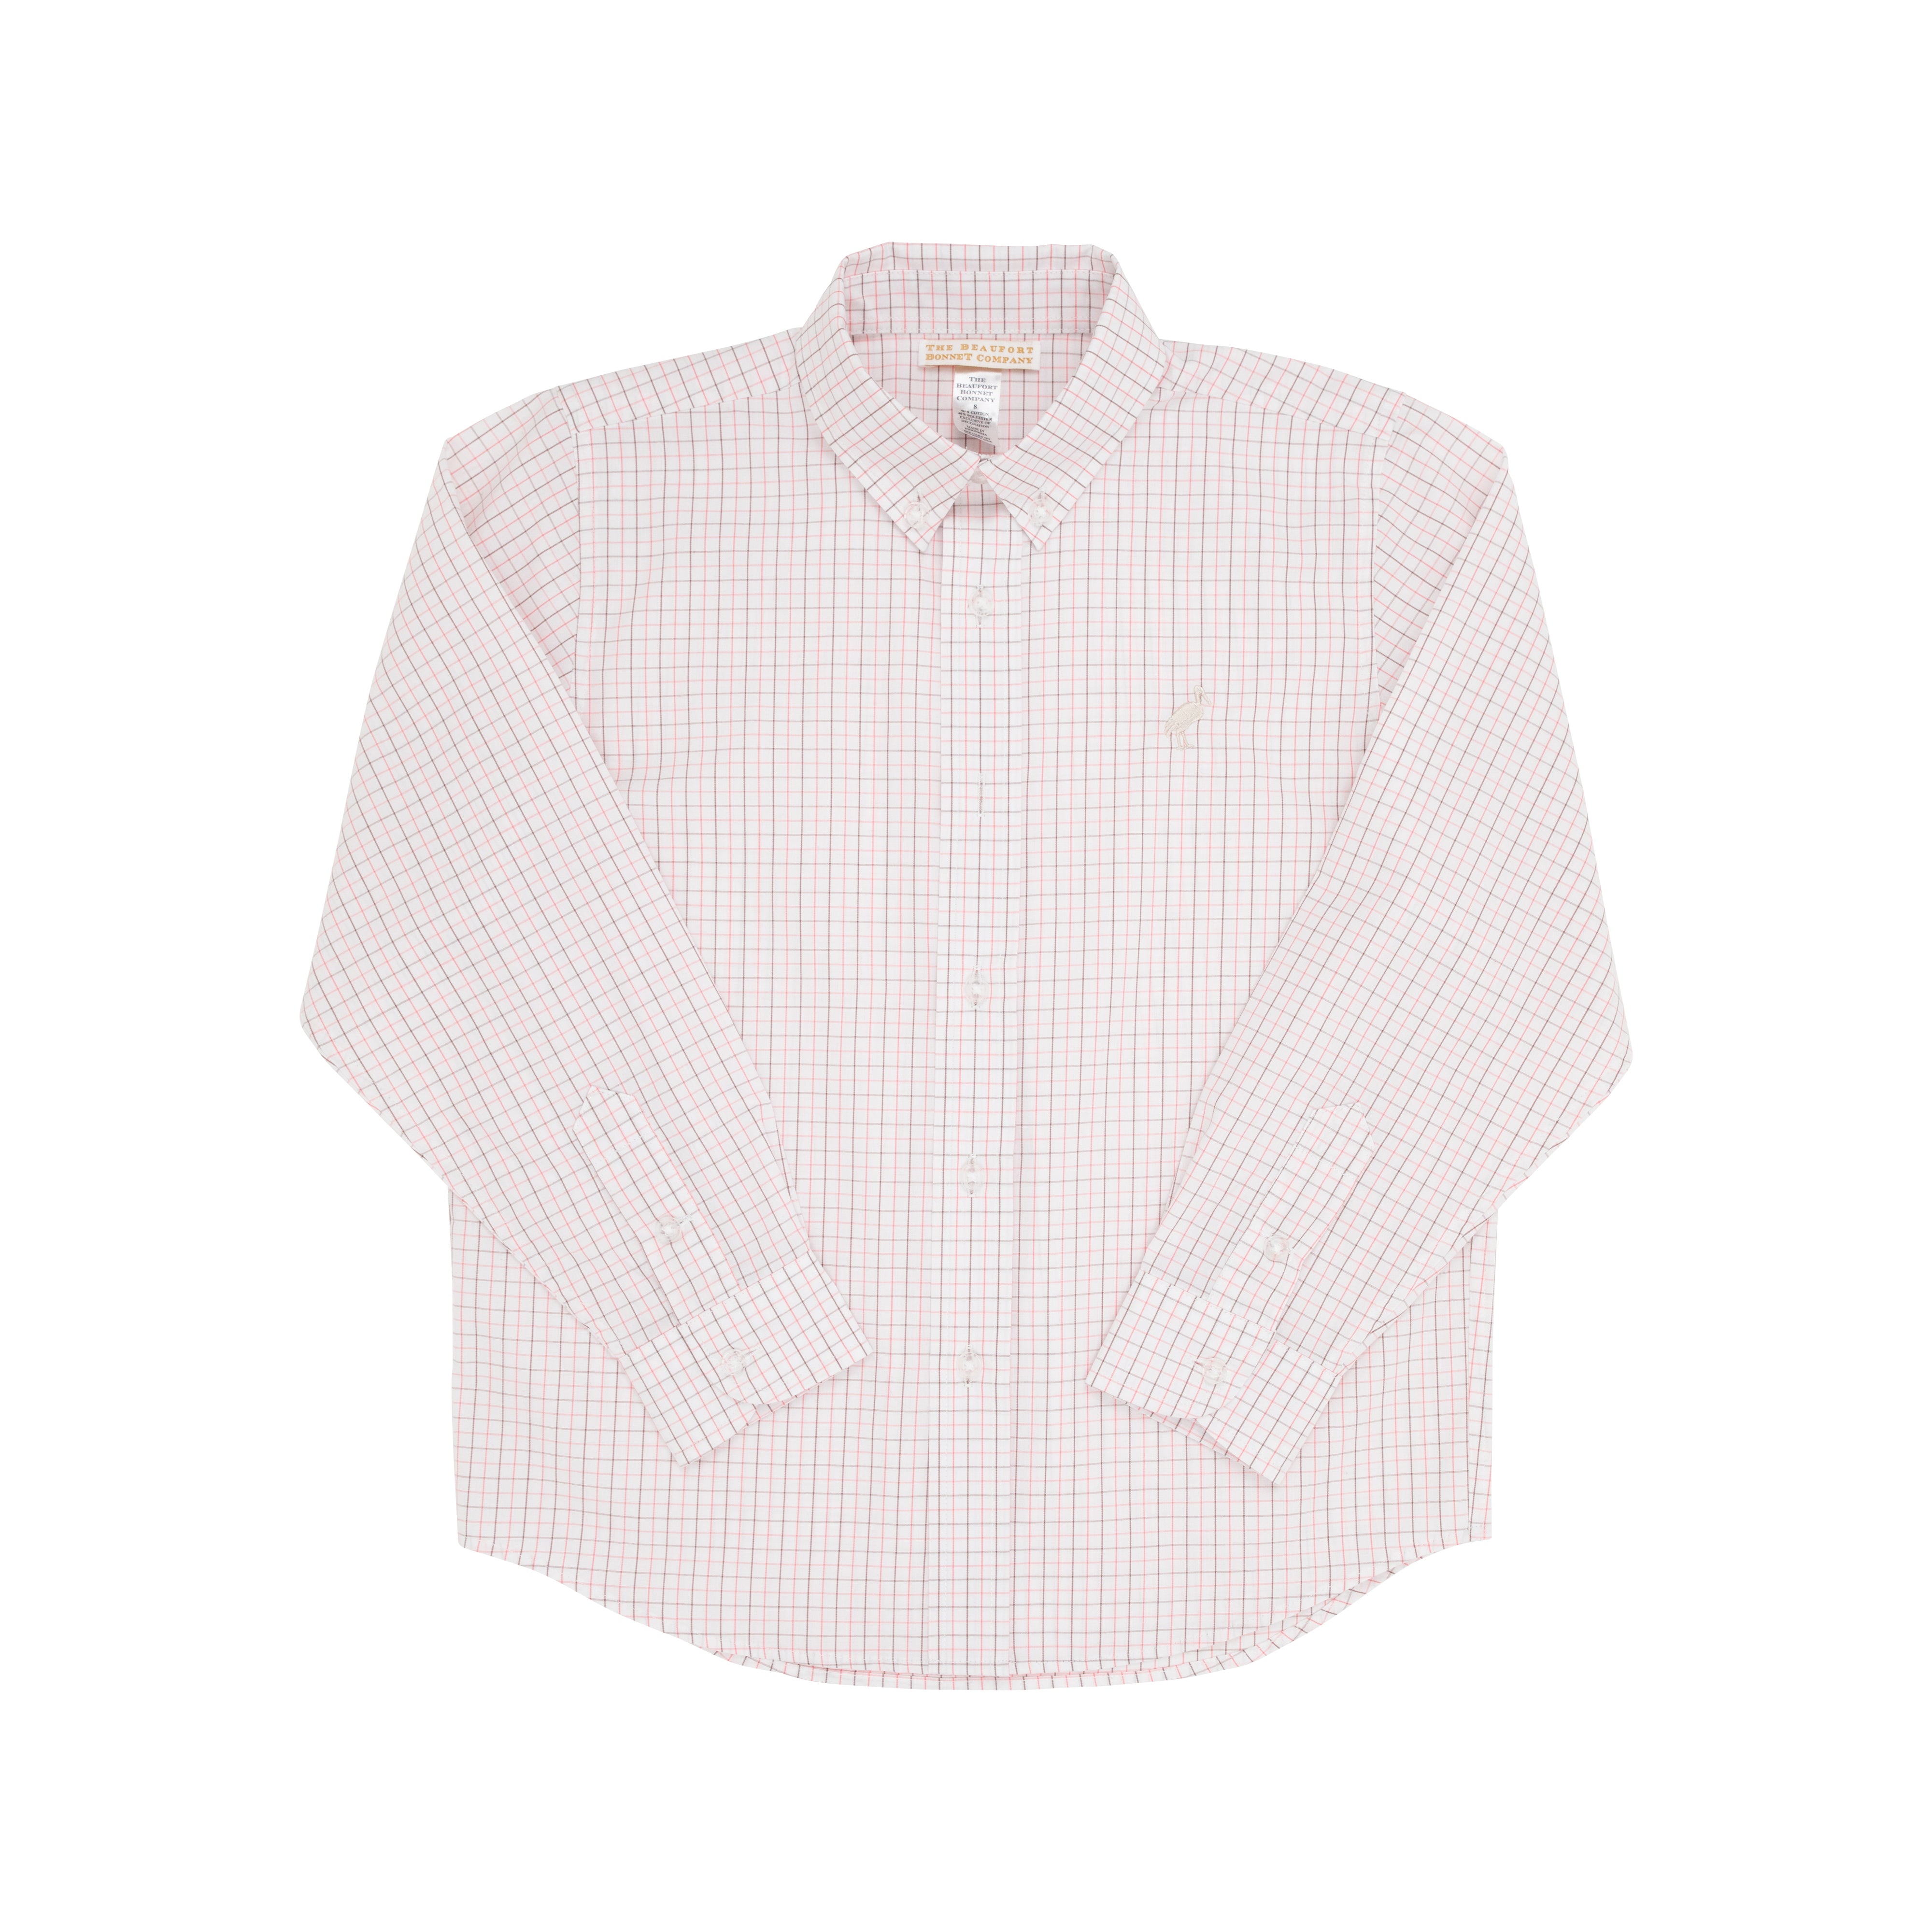 Dean's List Dress Shirt - Chelsea Chocolate and Parrot Cay Coral Windo ...